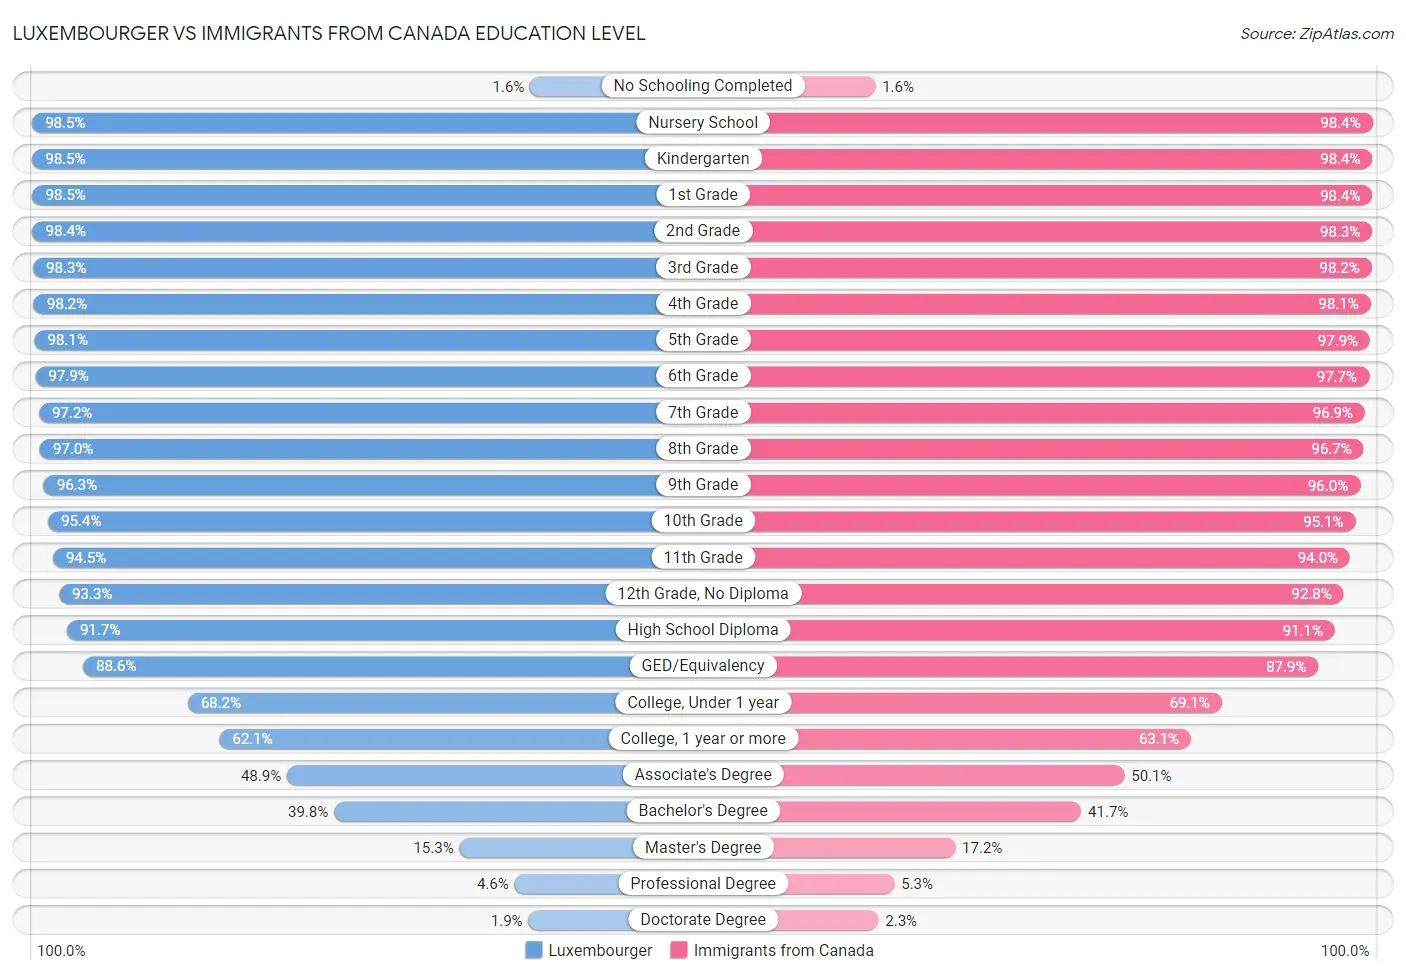 Luxembourger vs Immigrants from Canada Education Level